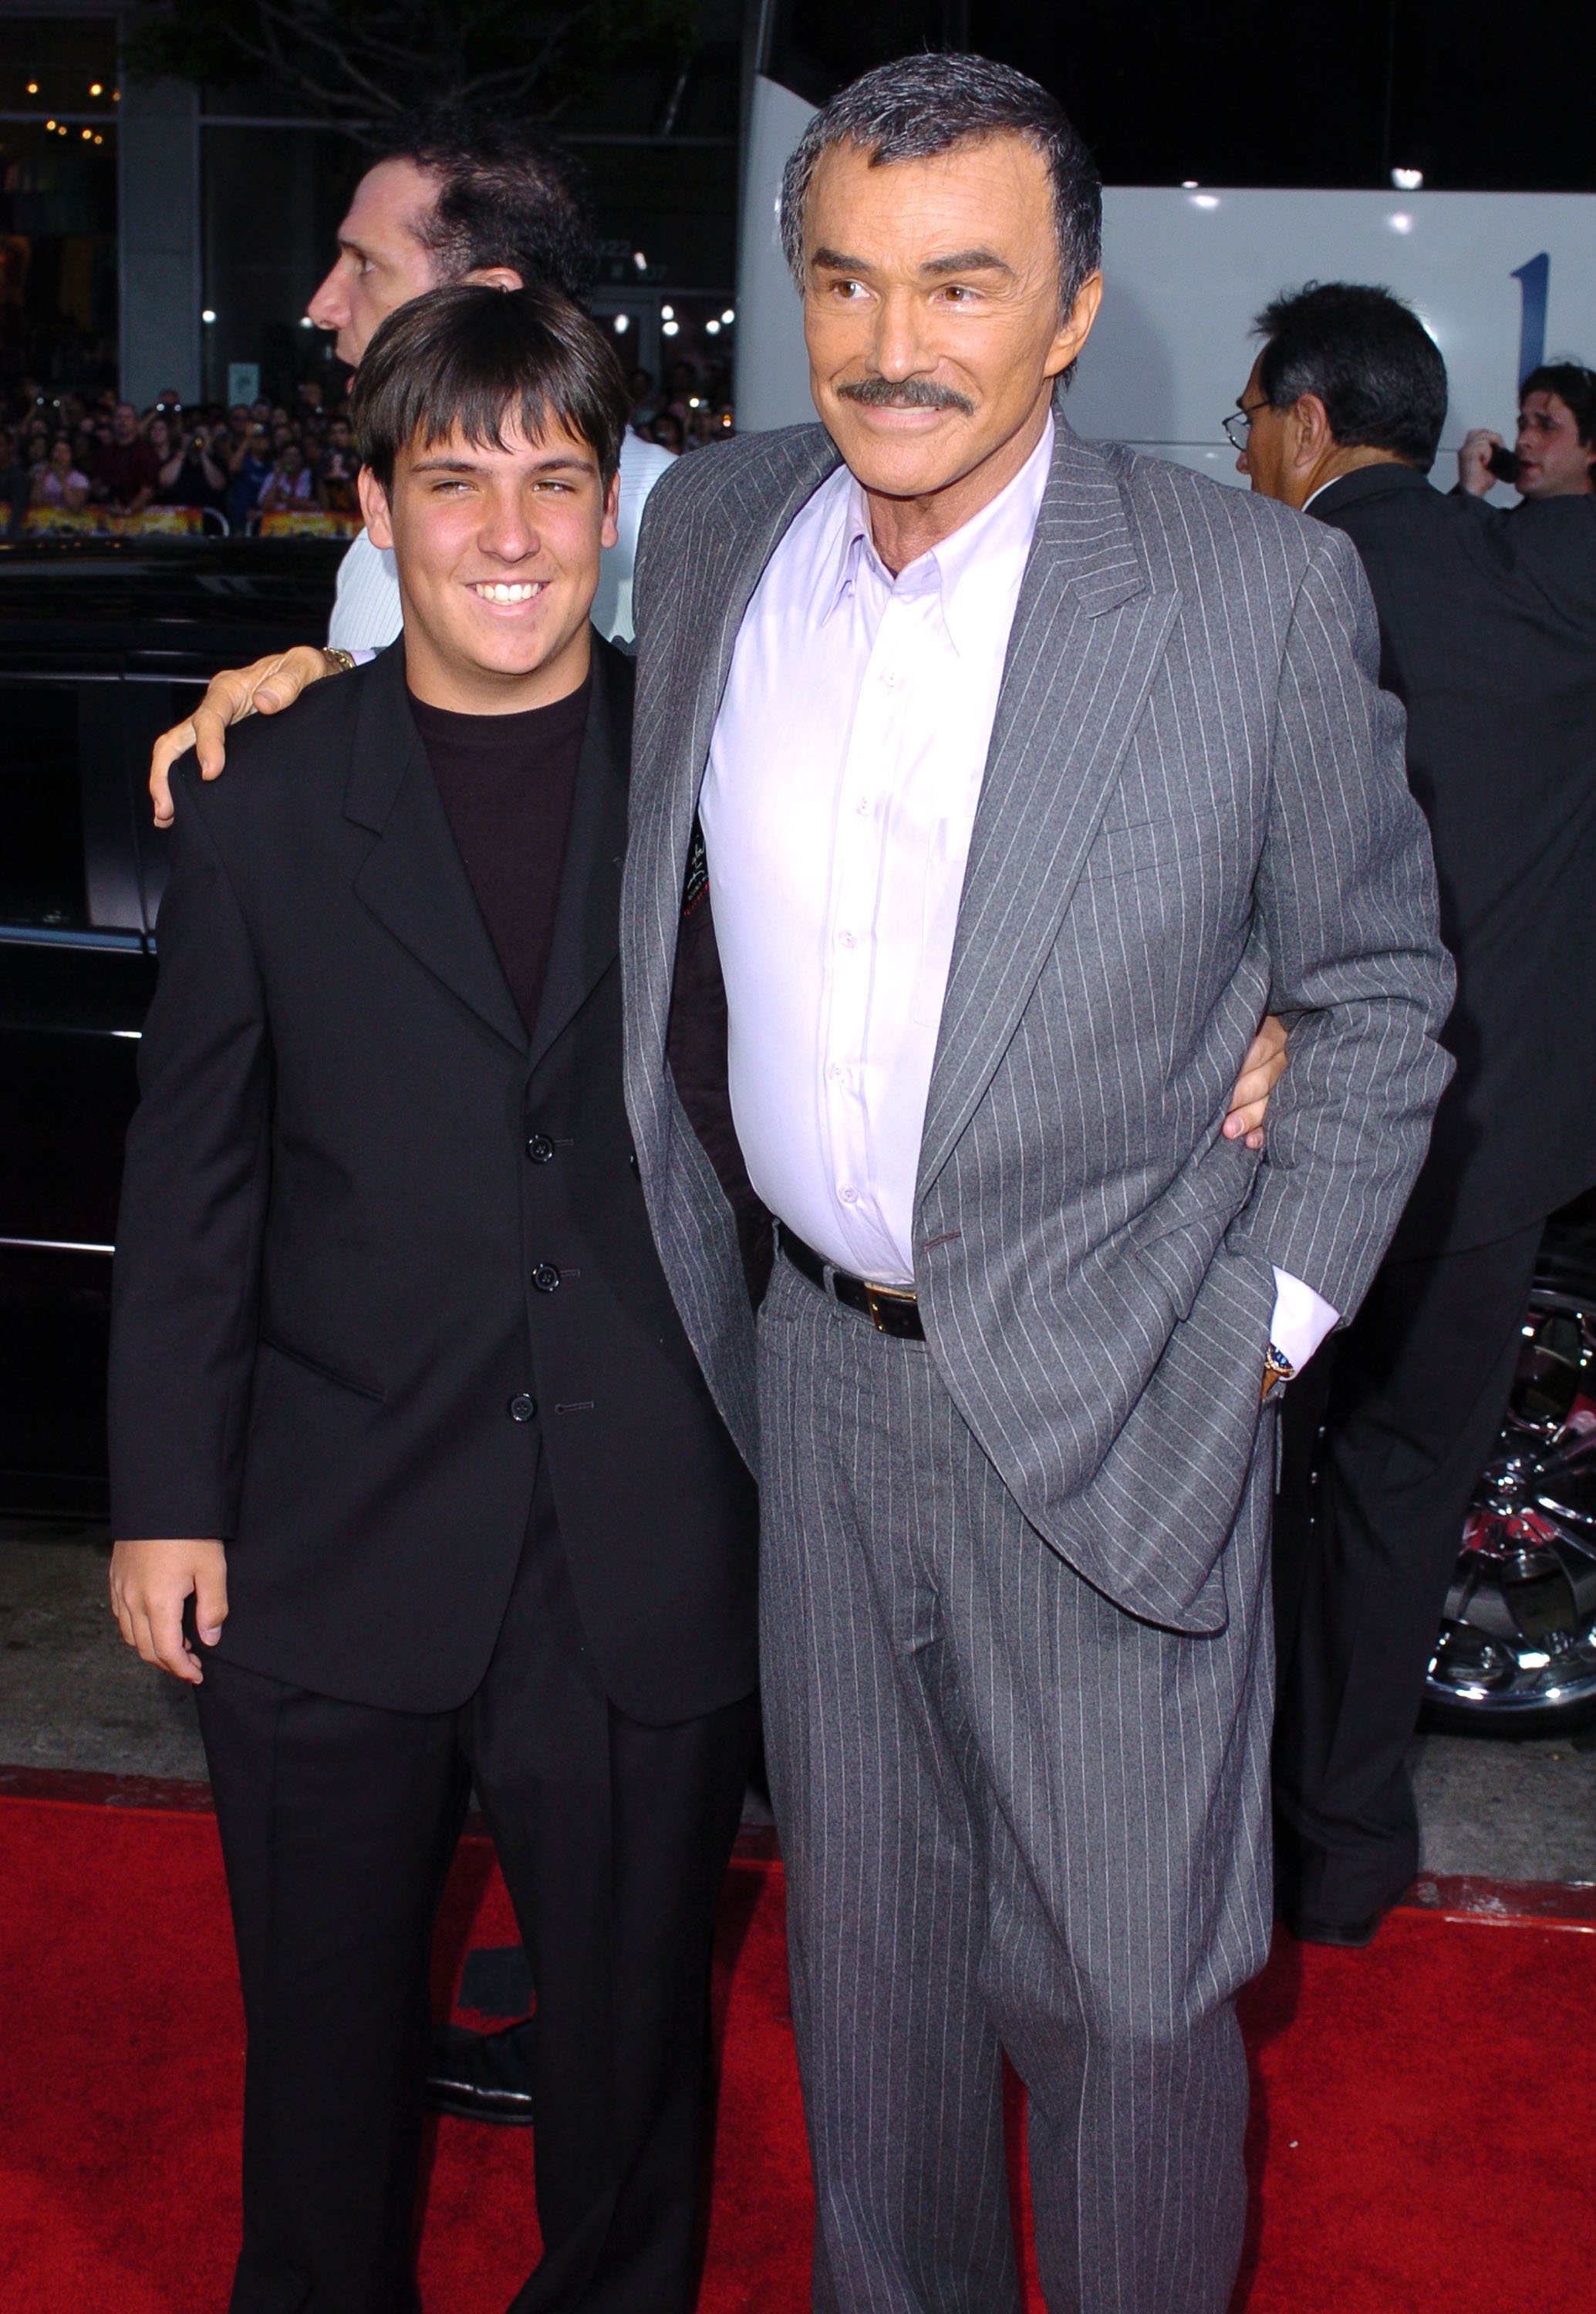 Burt Reynolds and son Quinton during "The Longest Yard" Los Angeles premiere at Grauman's Chinese Theatre in Hollywood, California. / Source: Getty Images